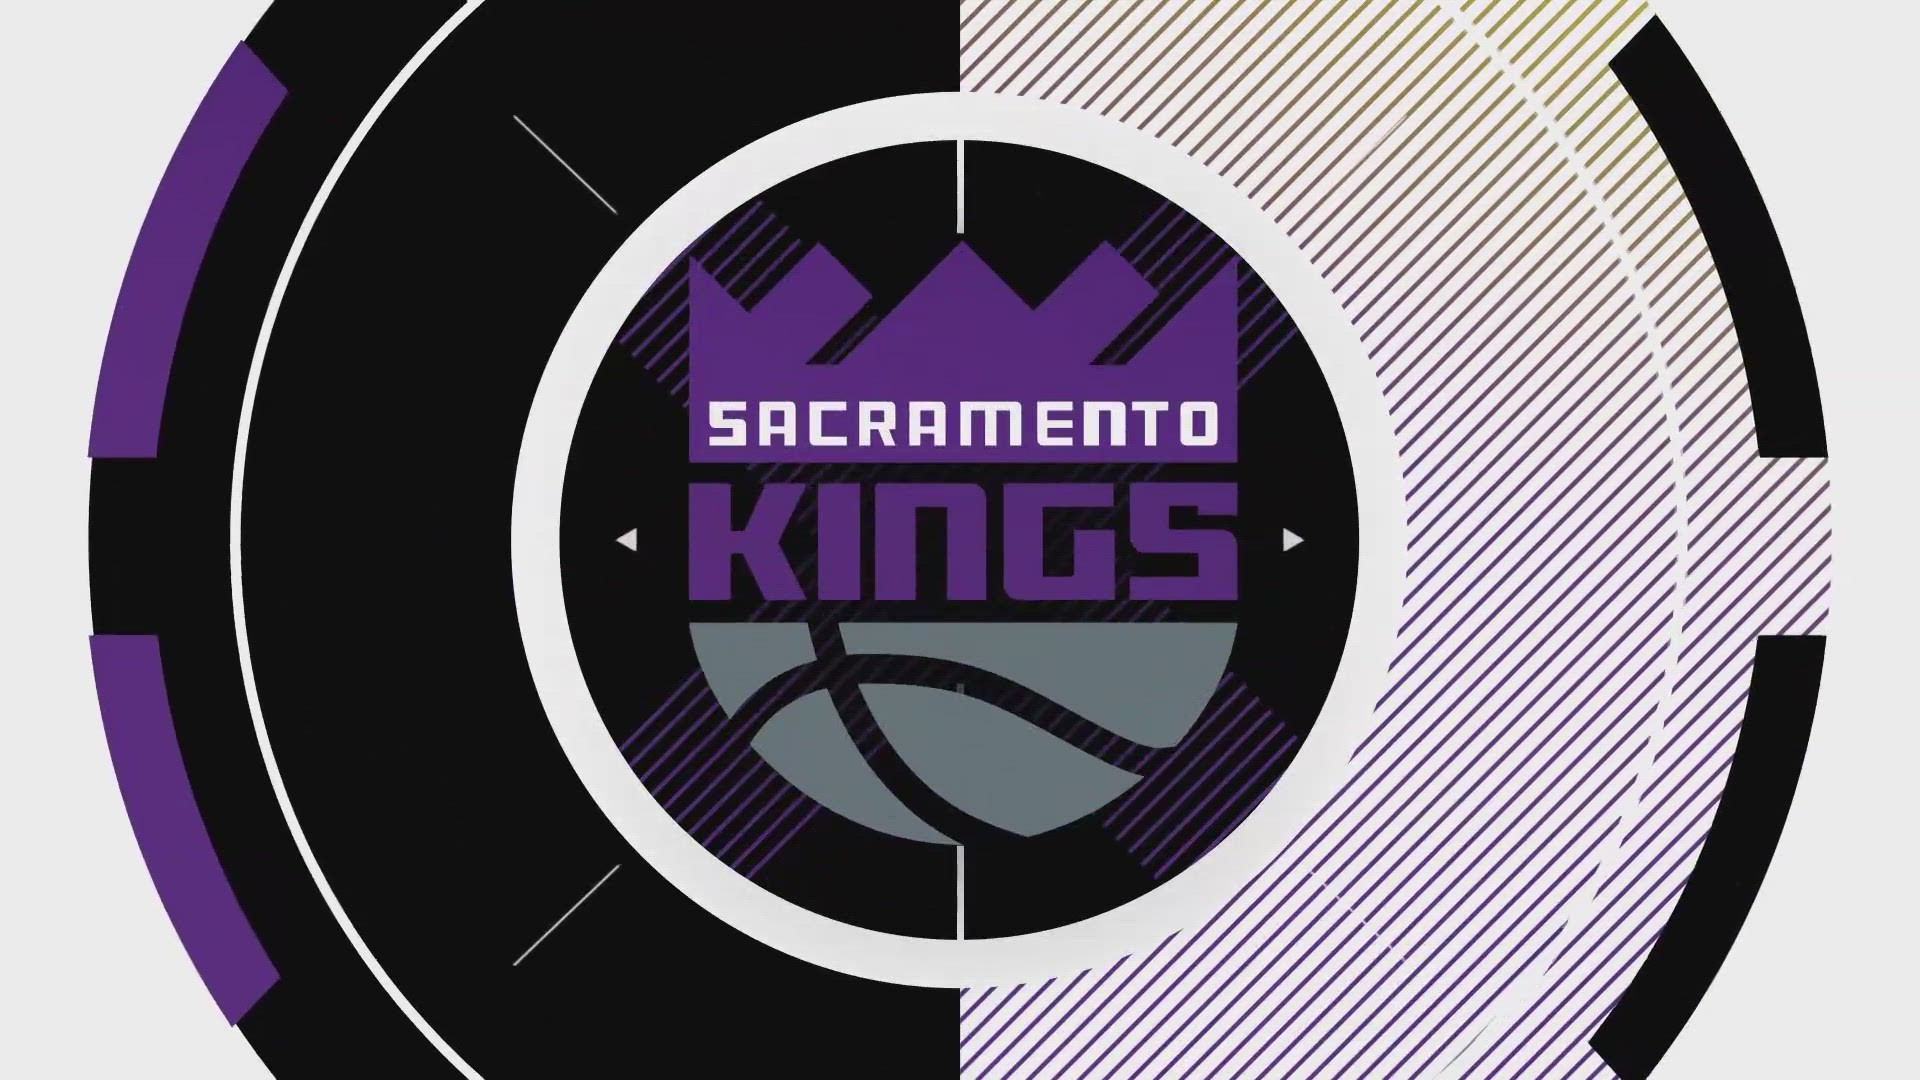 These 3 prospects would be perfect for the Kings